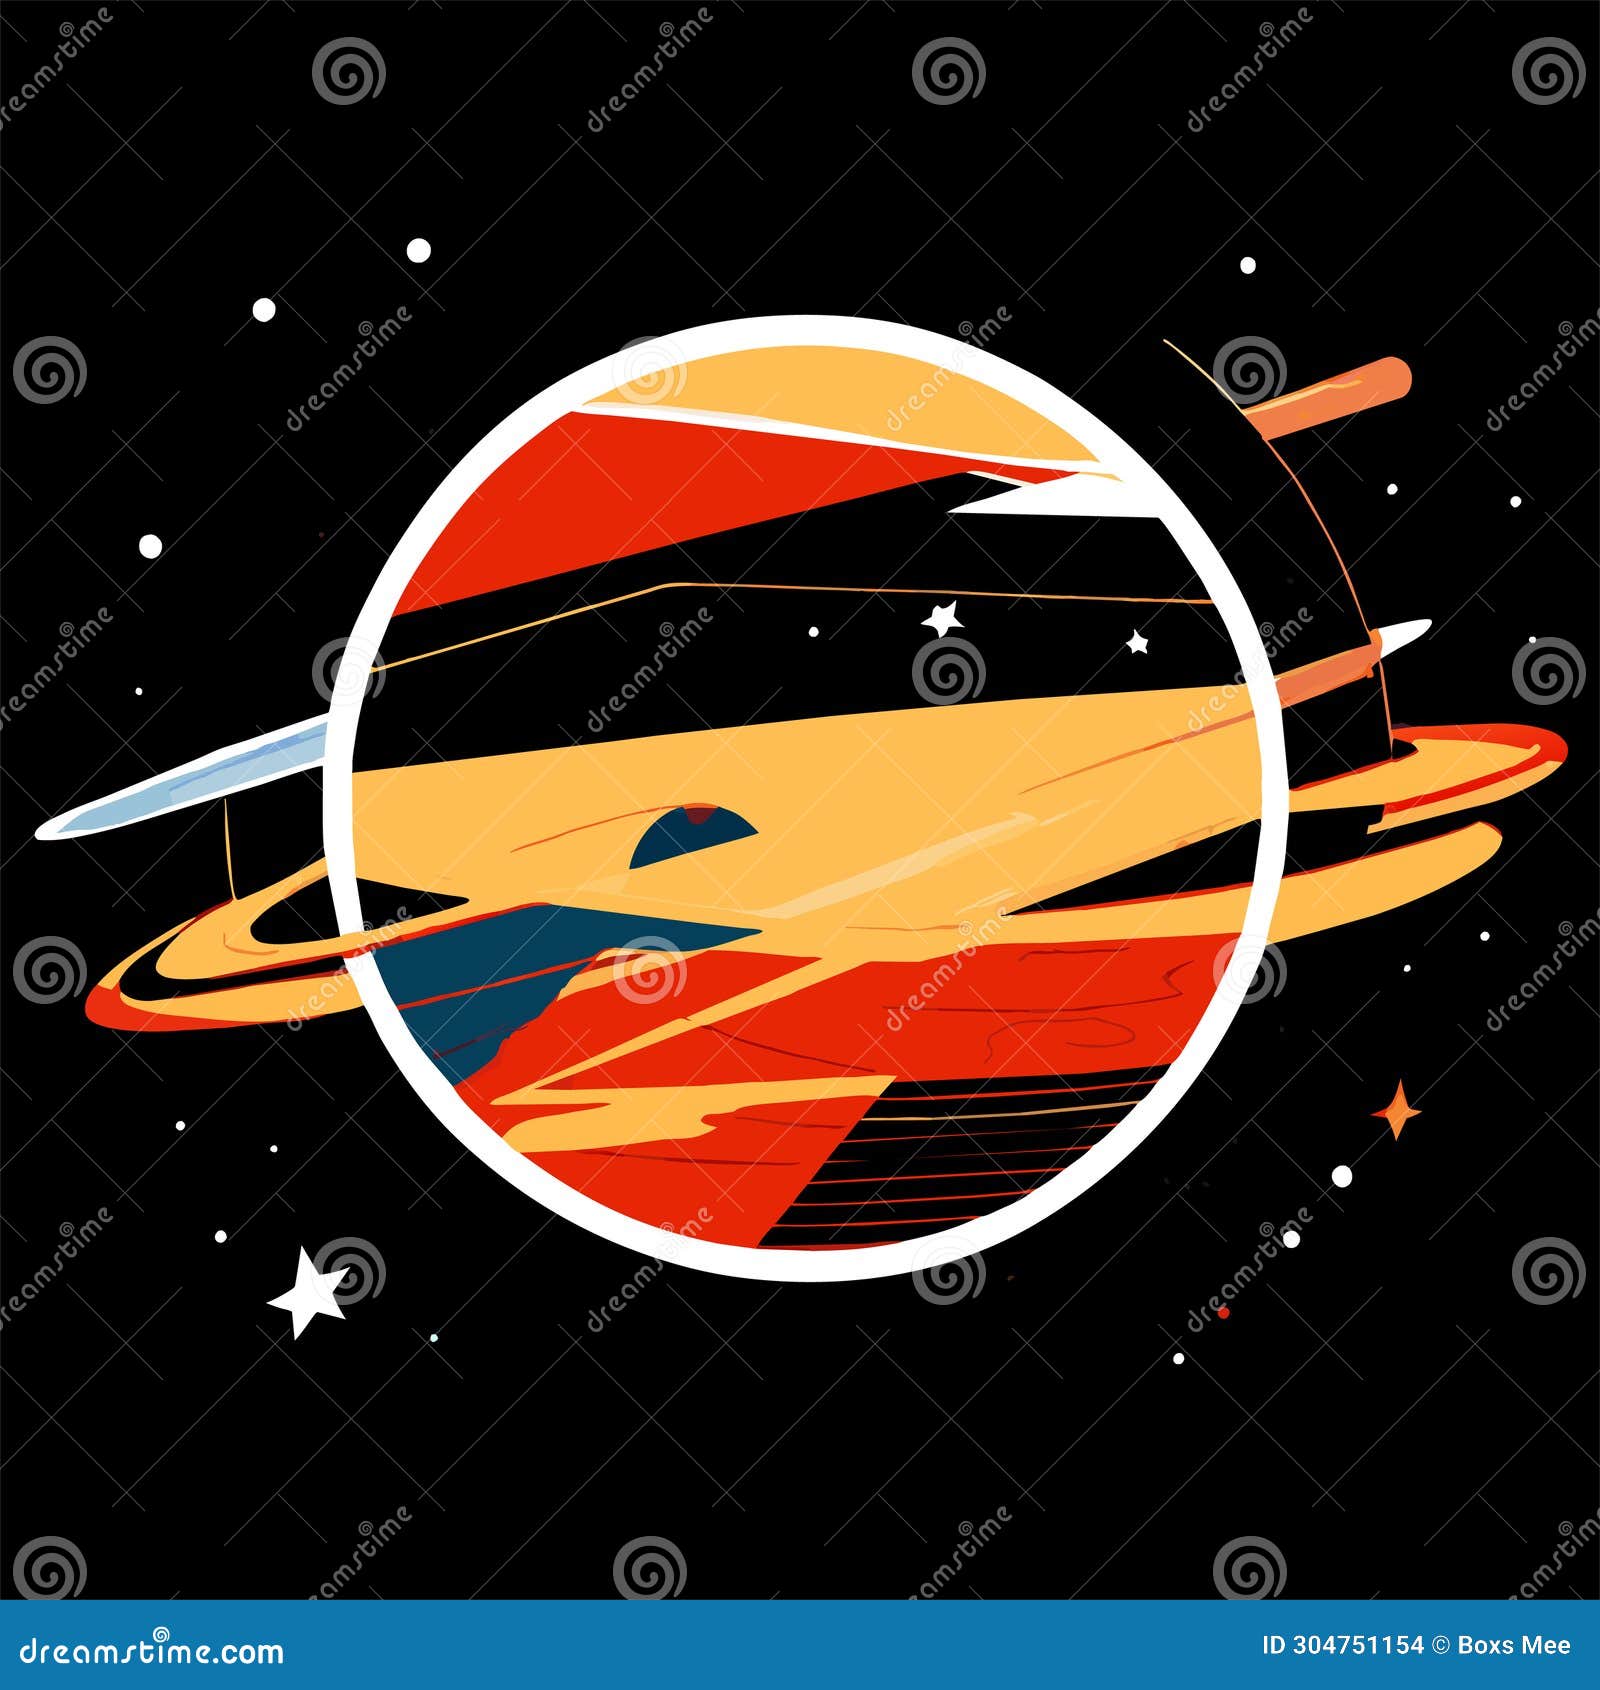 Vector Illustration of Spaceship in Space with Planets and Stars ...